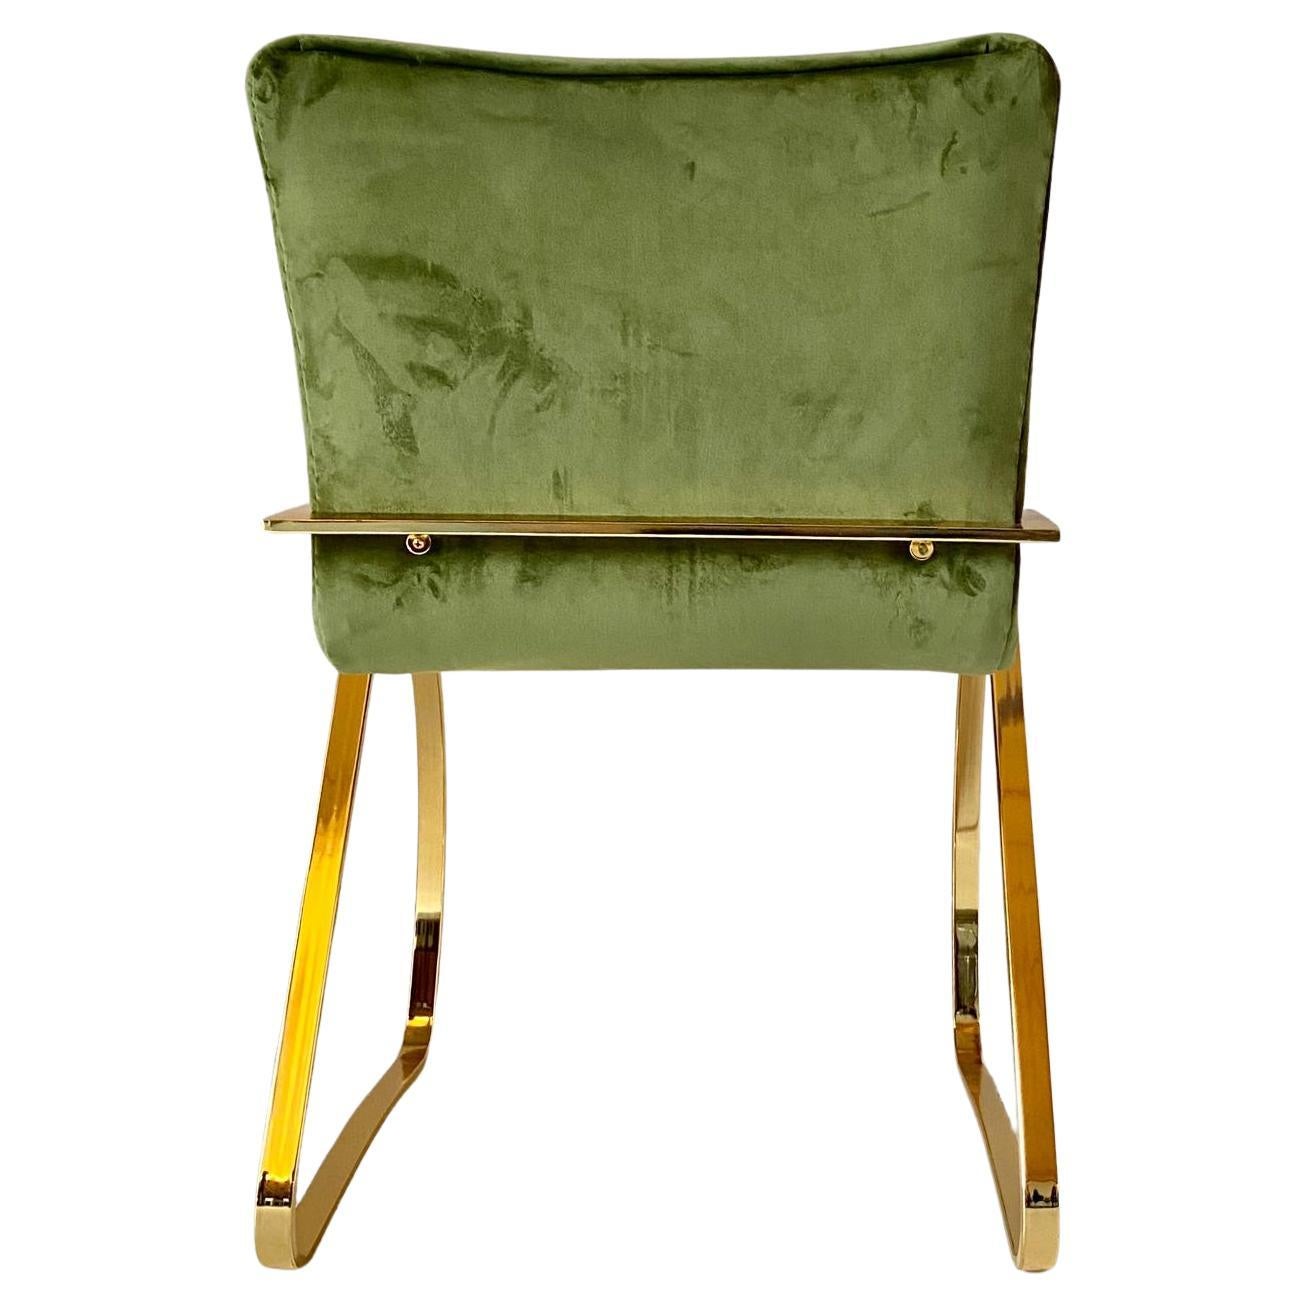 Late 20th Century Vintage Desk Chair with Green Velvet Cover and Gold frame, Italy 1970s For Sale